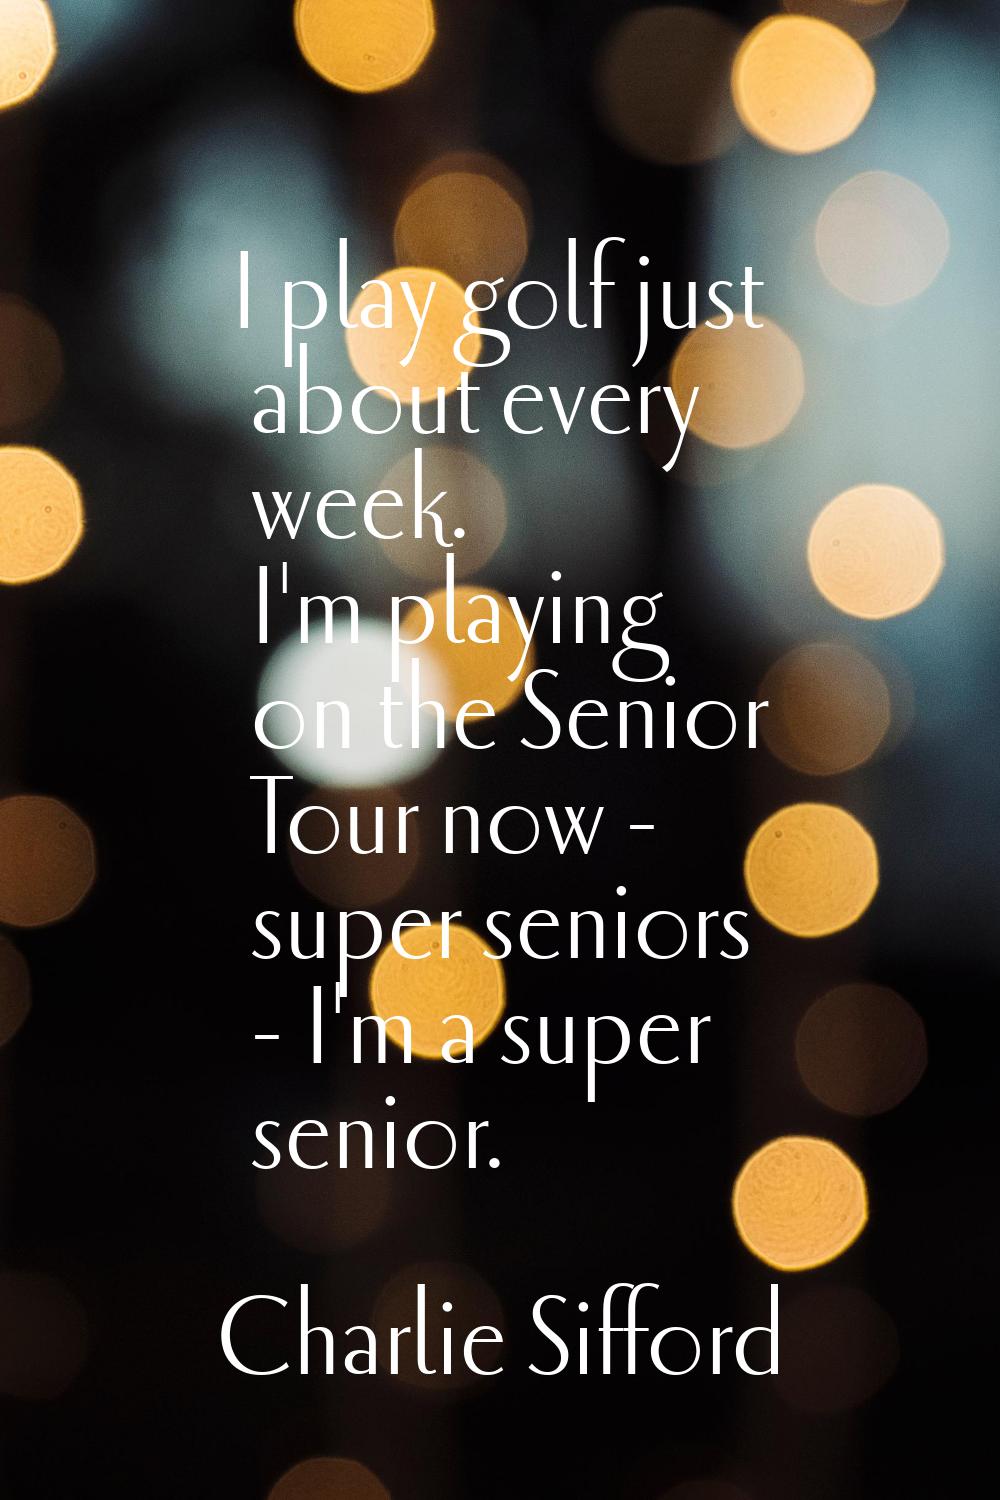 I play golf just about every week. I'm playing on the Senior Tour now - super seniors - I'm a super